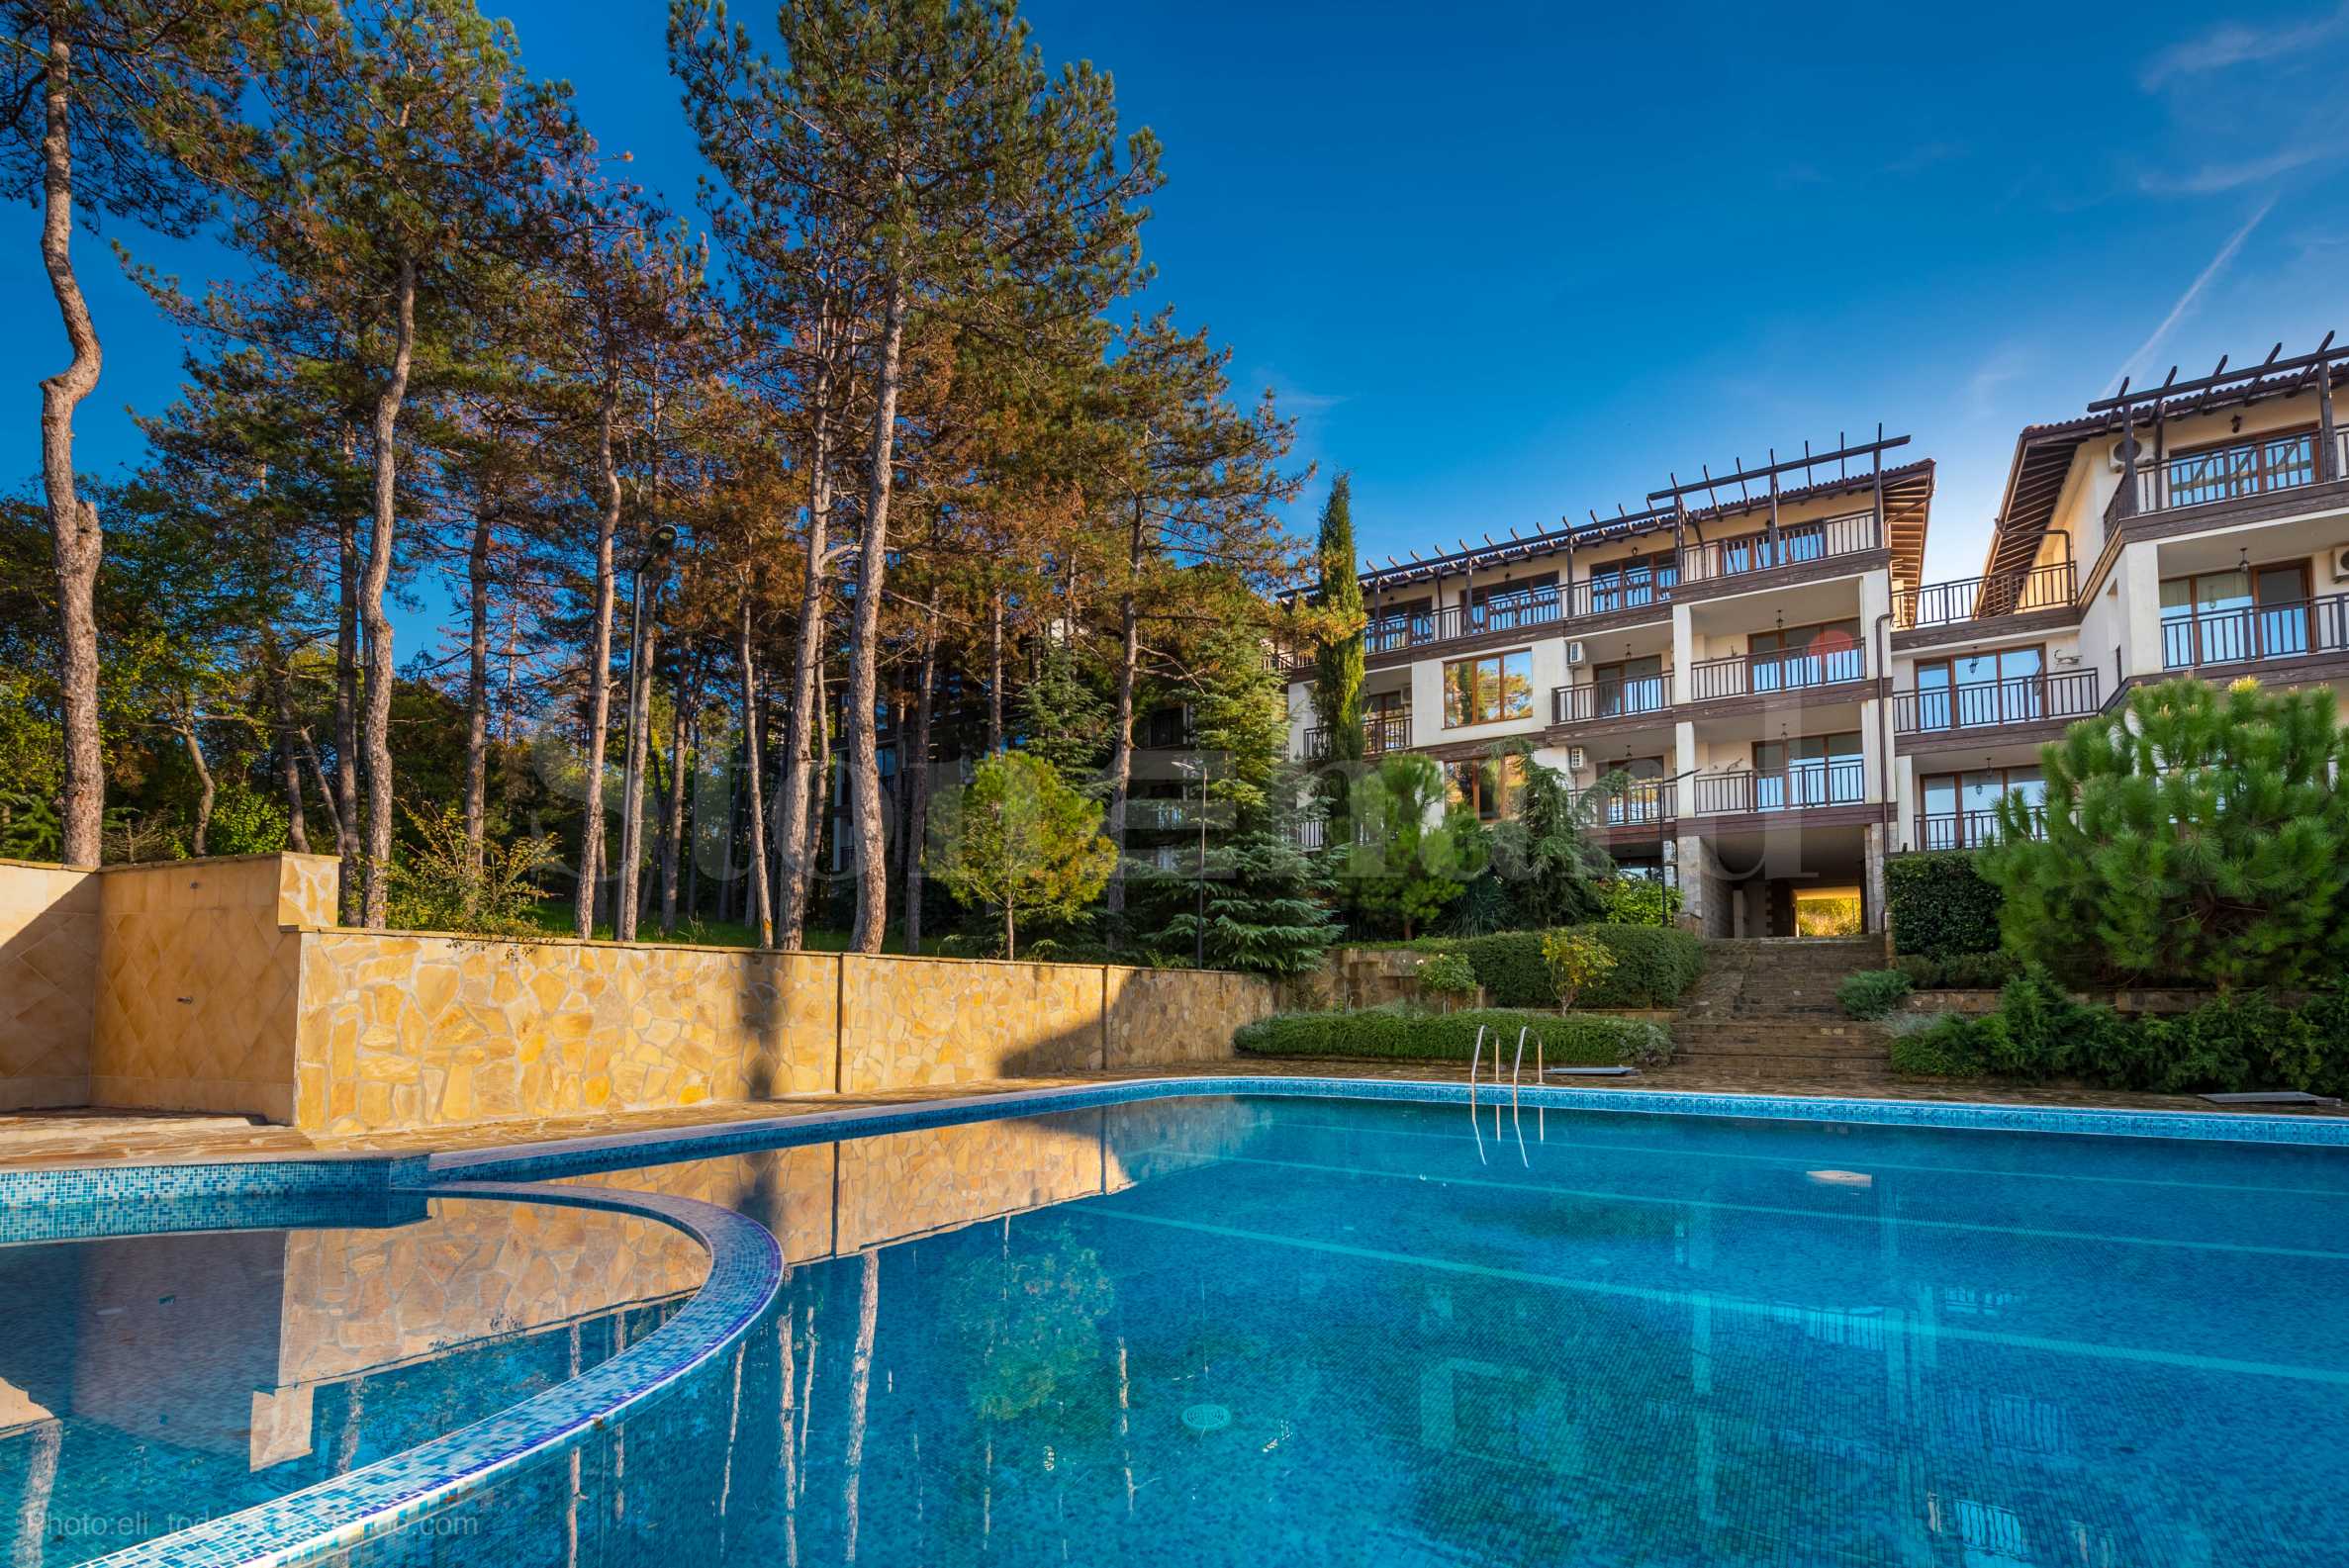 PROMO prices until the end of 2021. New complex in a pine forest, near the beach1 - Stonehard